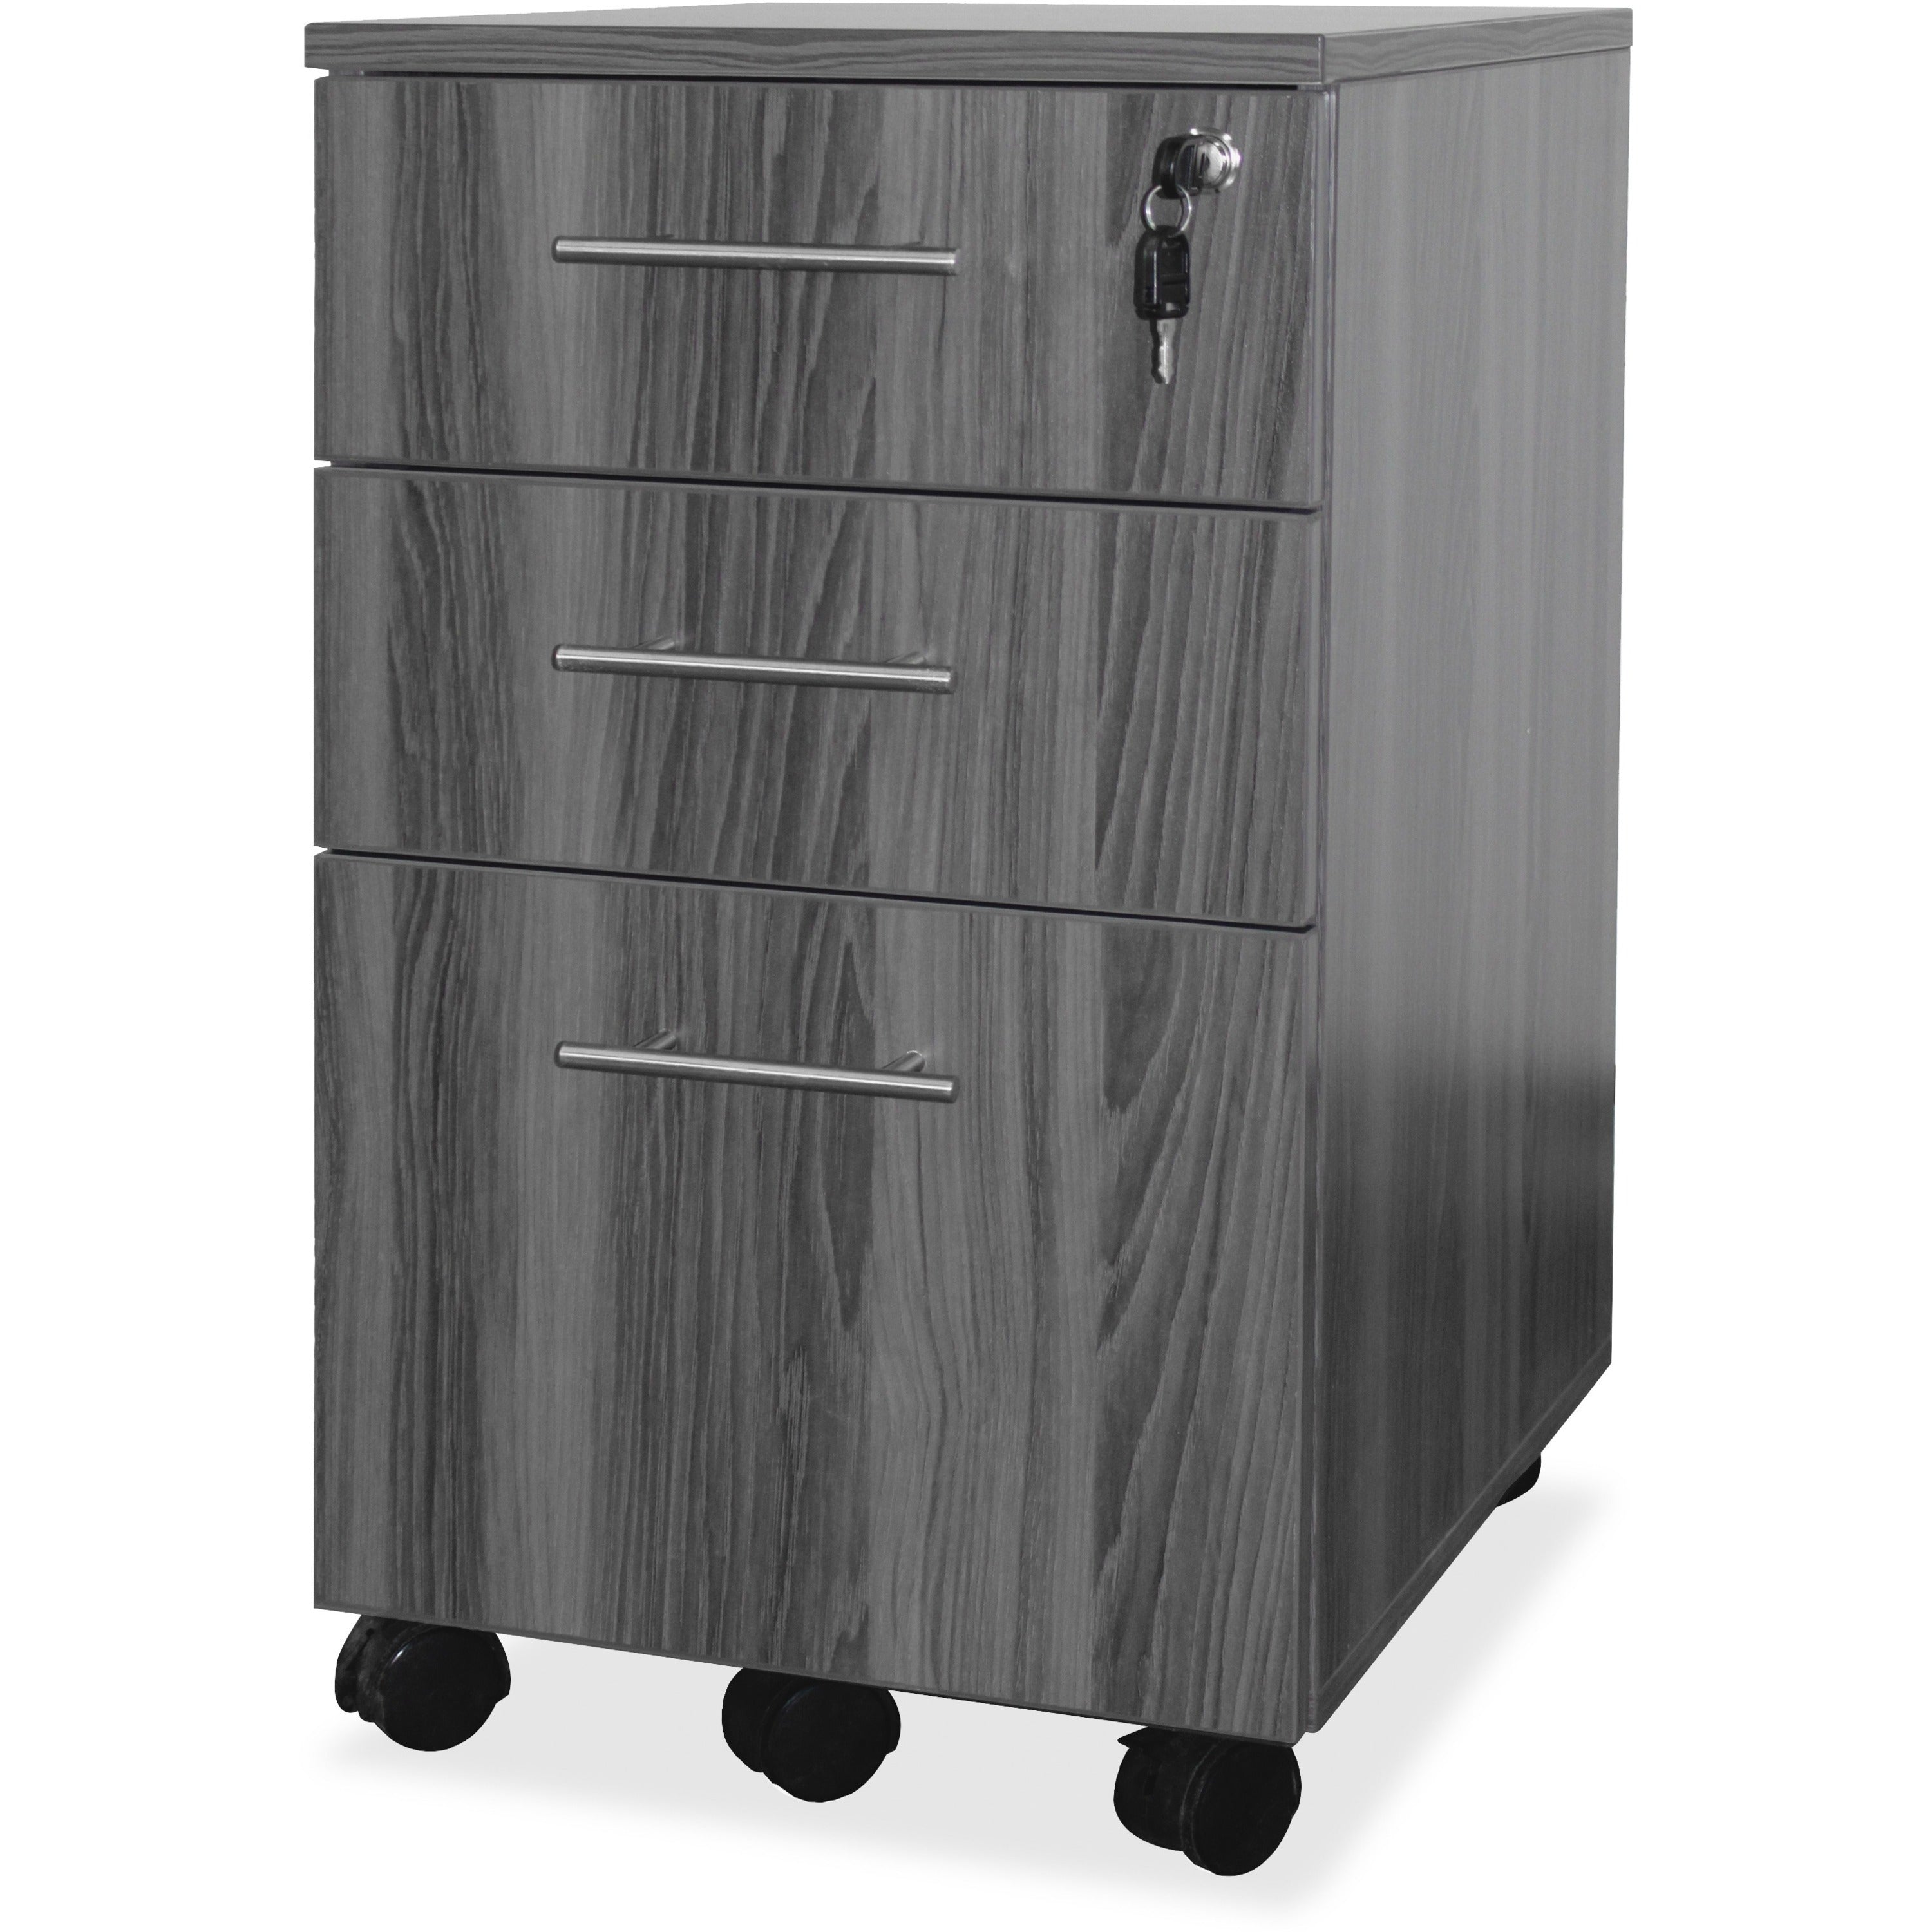 Mayline Medina Box/Box/File Mobile Pedestal - 18" x 15.5" x 26.8" - 3 x Box, File Drawer(s) - Material: Steel - Finish: Gray, Laminate - Stain Resistant, Water Resistant, Abrasion Resistant, Ball-bearing Suspension, Drawer Extension, Built-in Hangrai - 